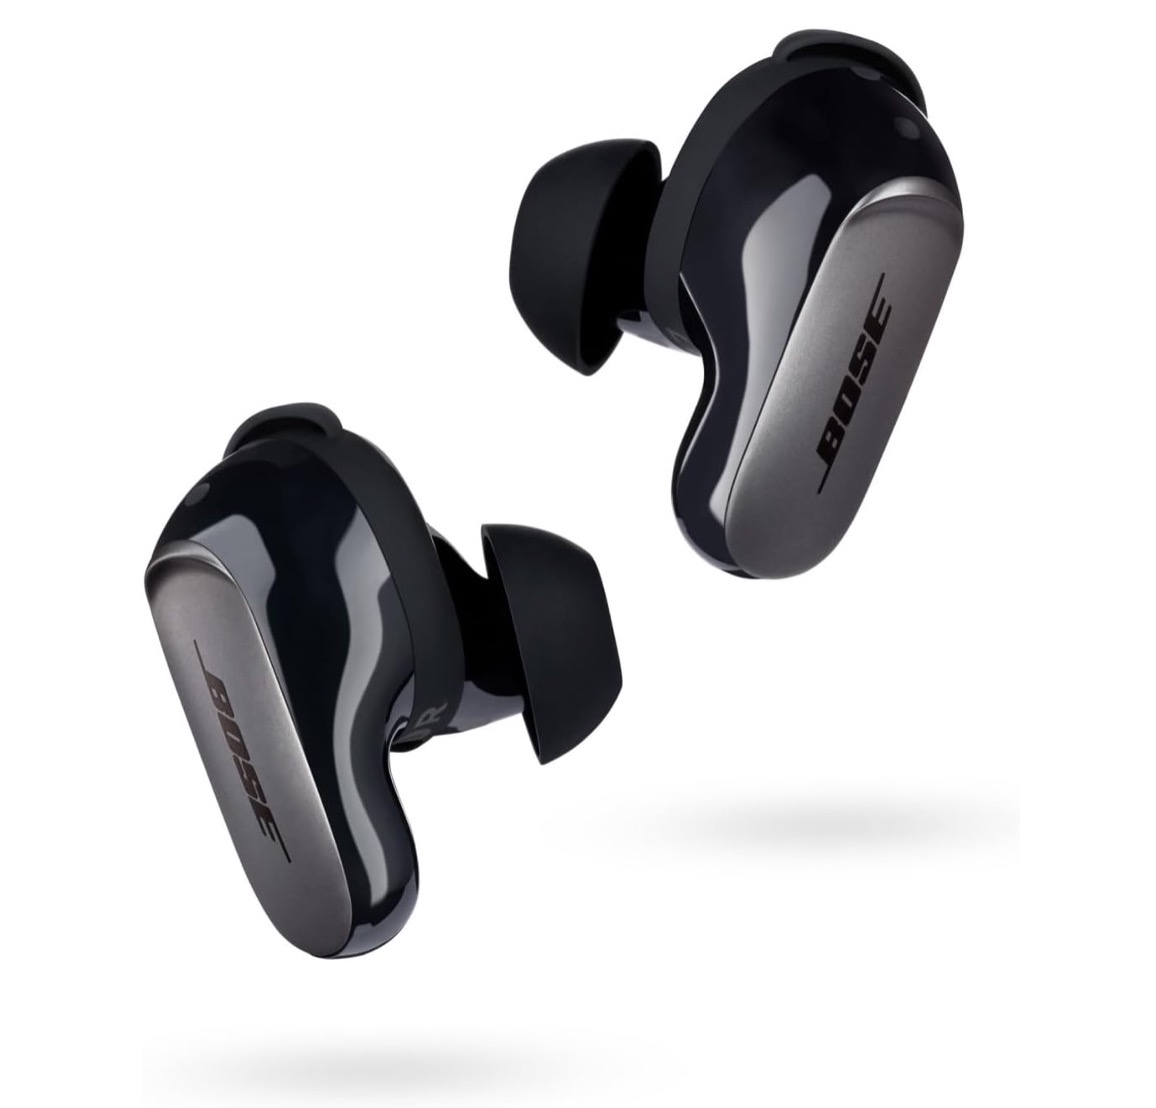 Bose QuietComfort Ultra wireless noise cancelling earbuds